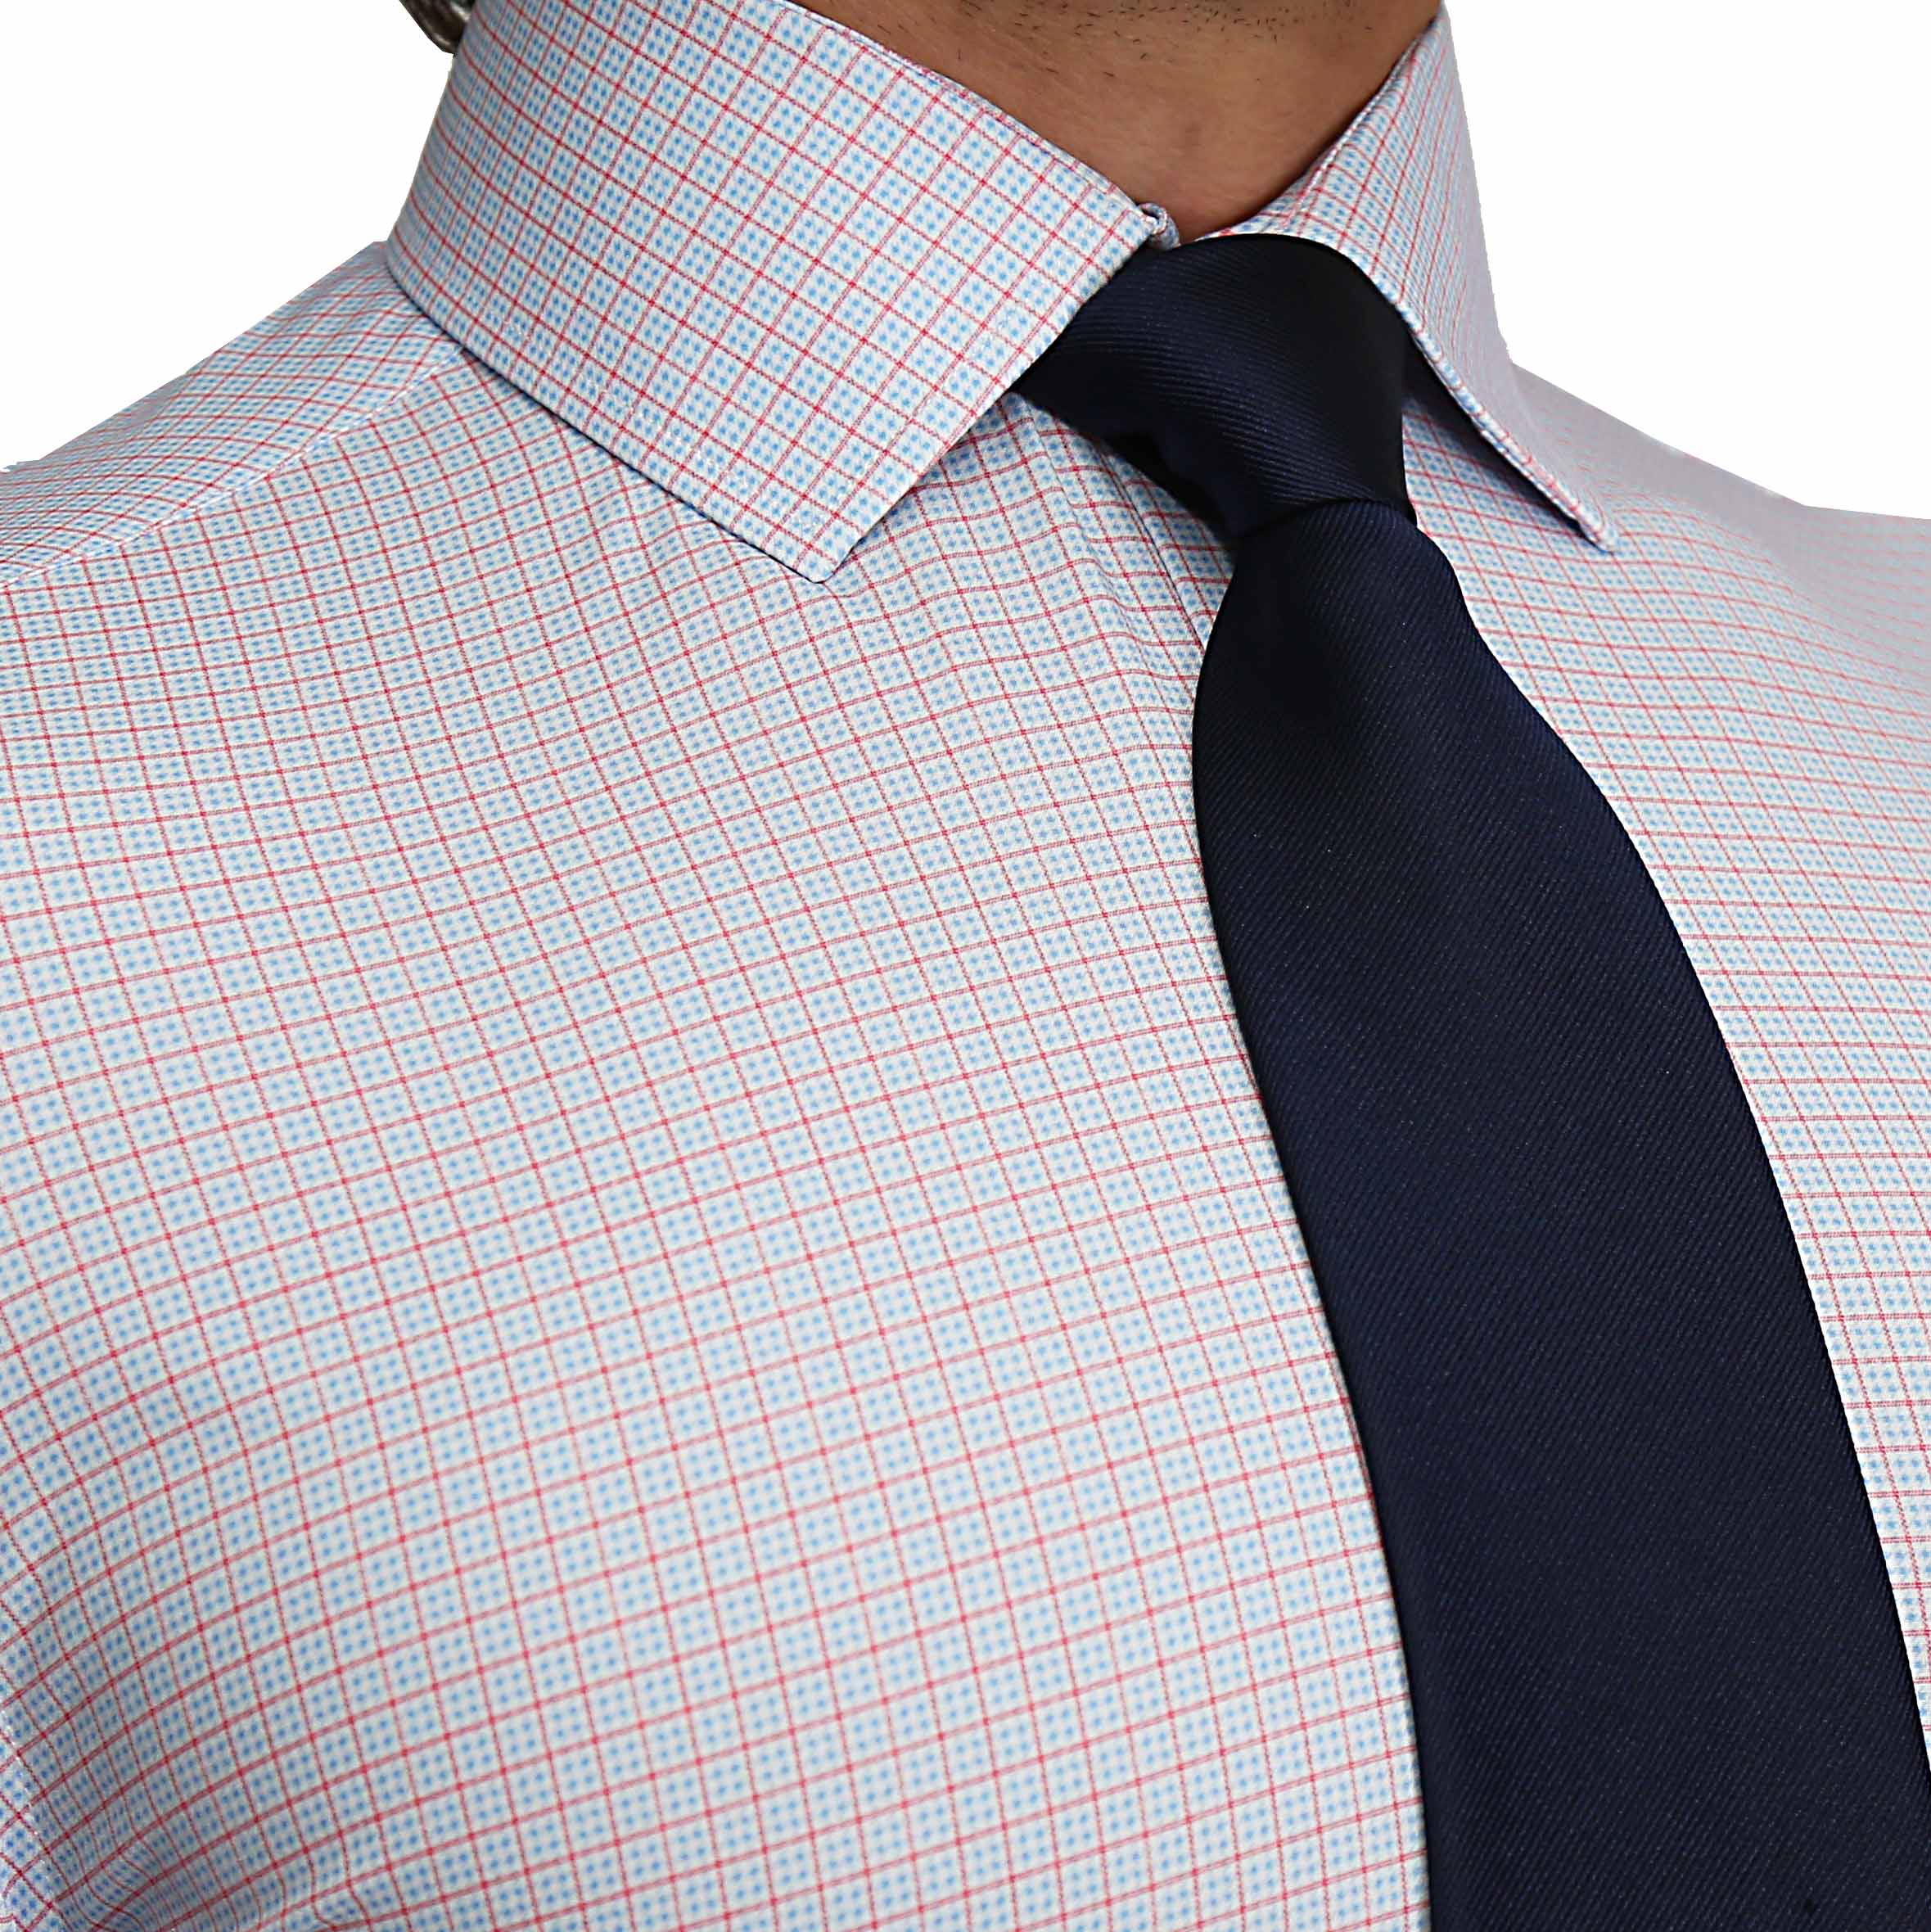 "The Buck" Orange and Blue Pattern - Classic Fit